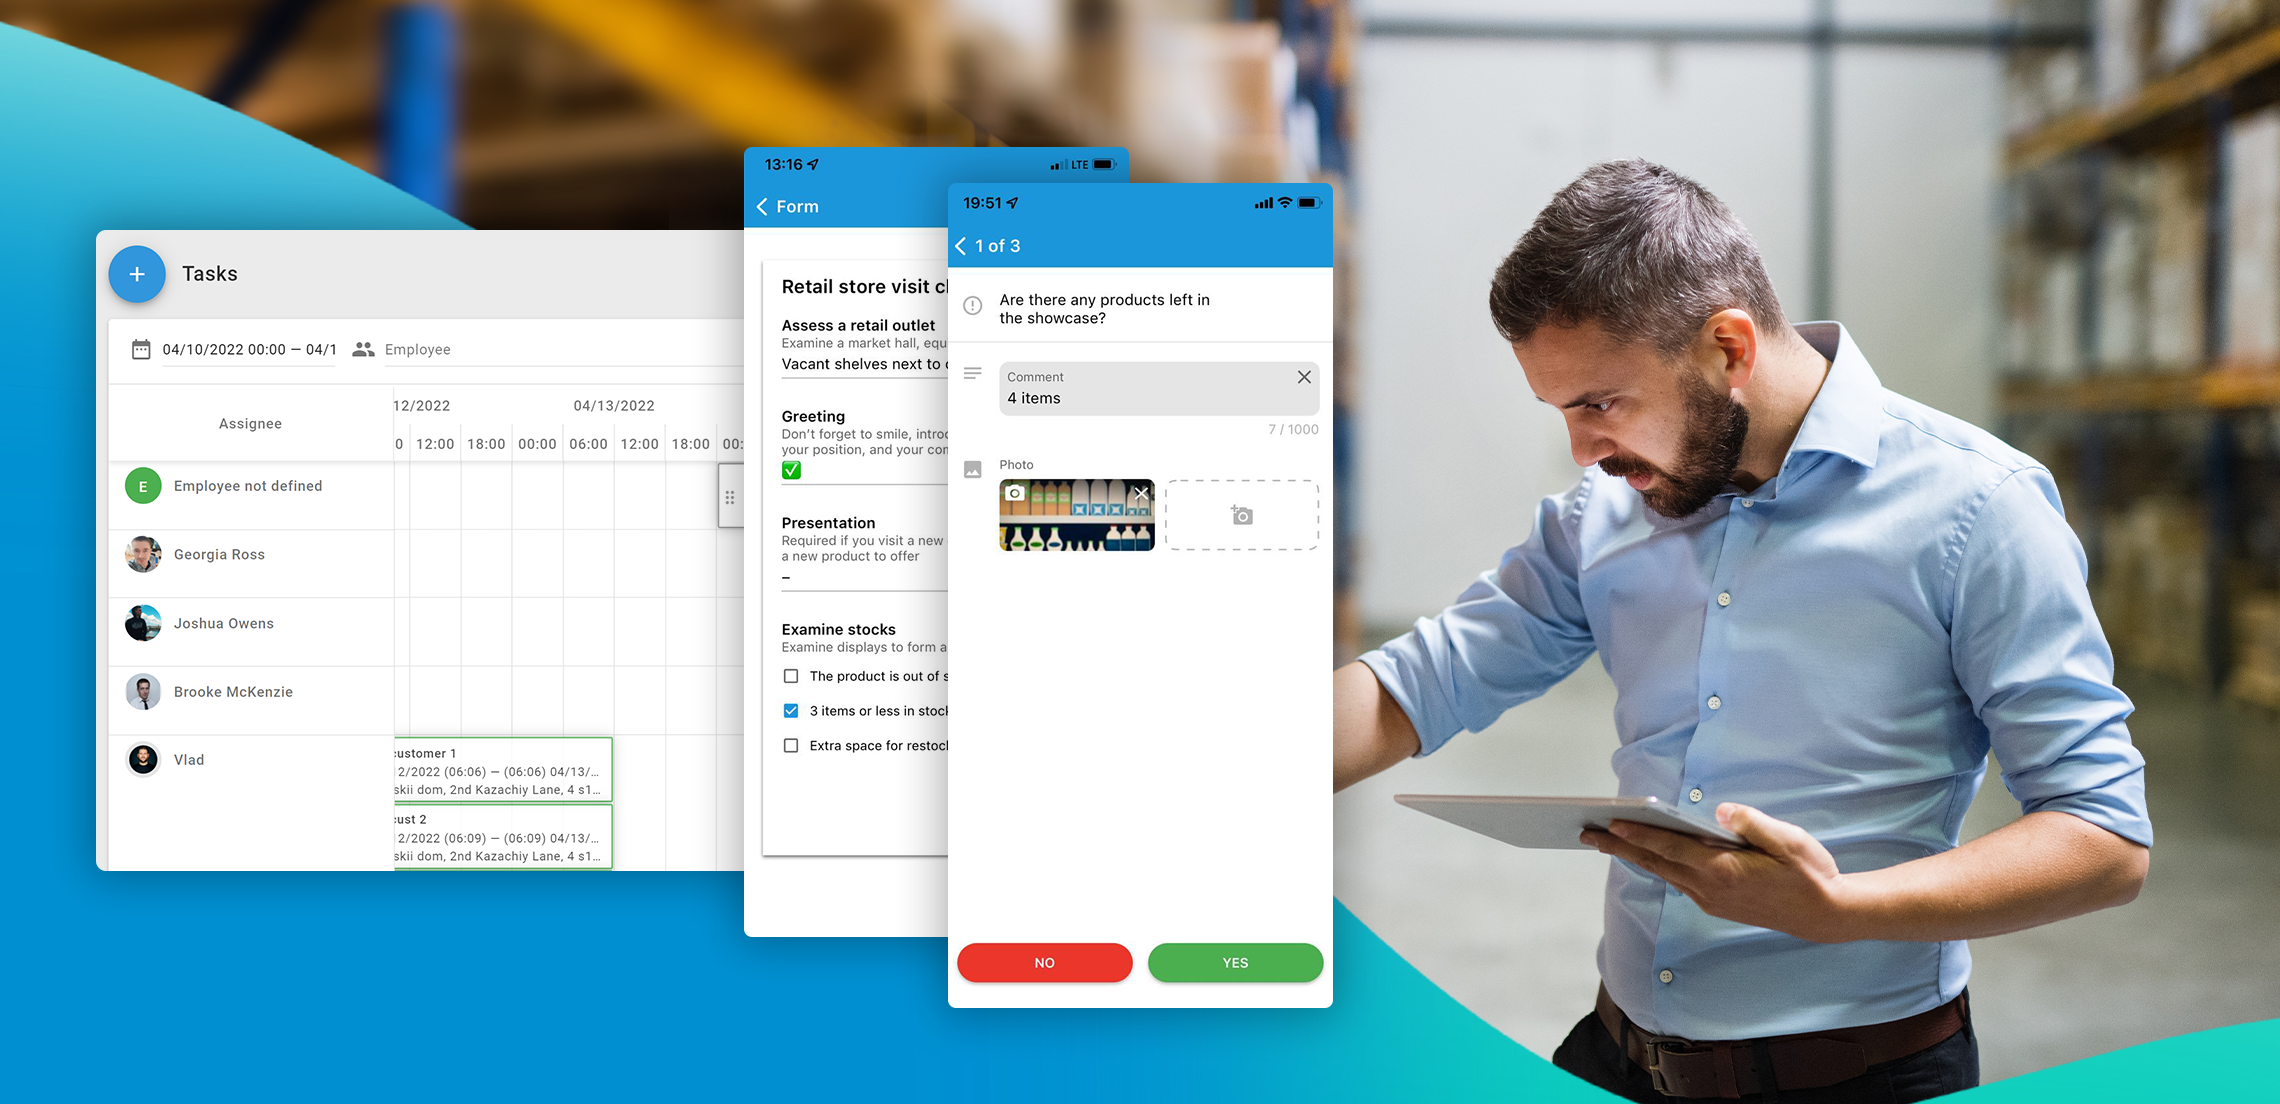 Аutomate your daily tasks and improve satisfaction with mobile workforce management software